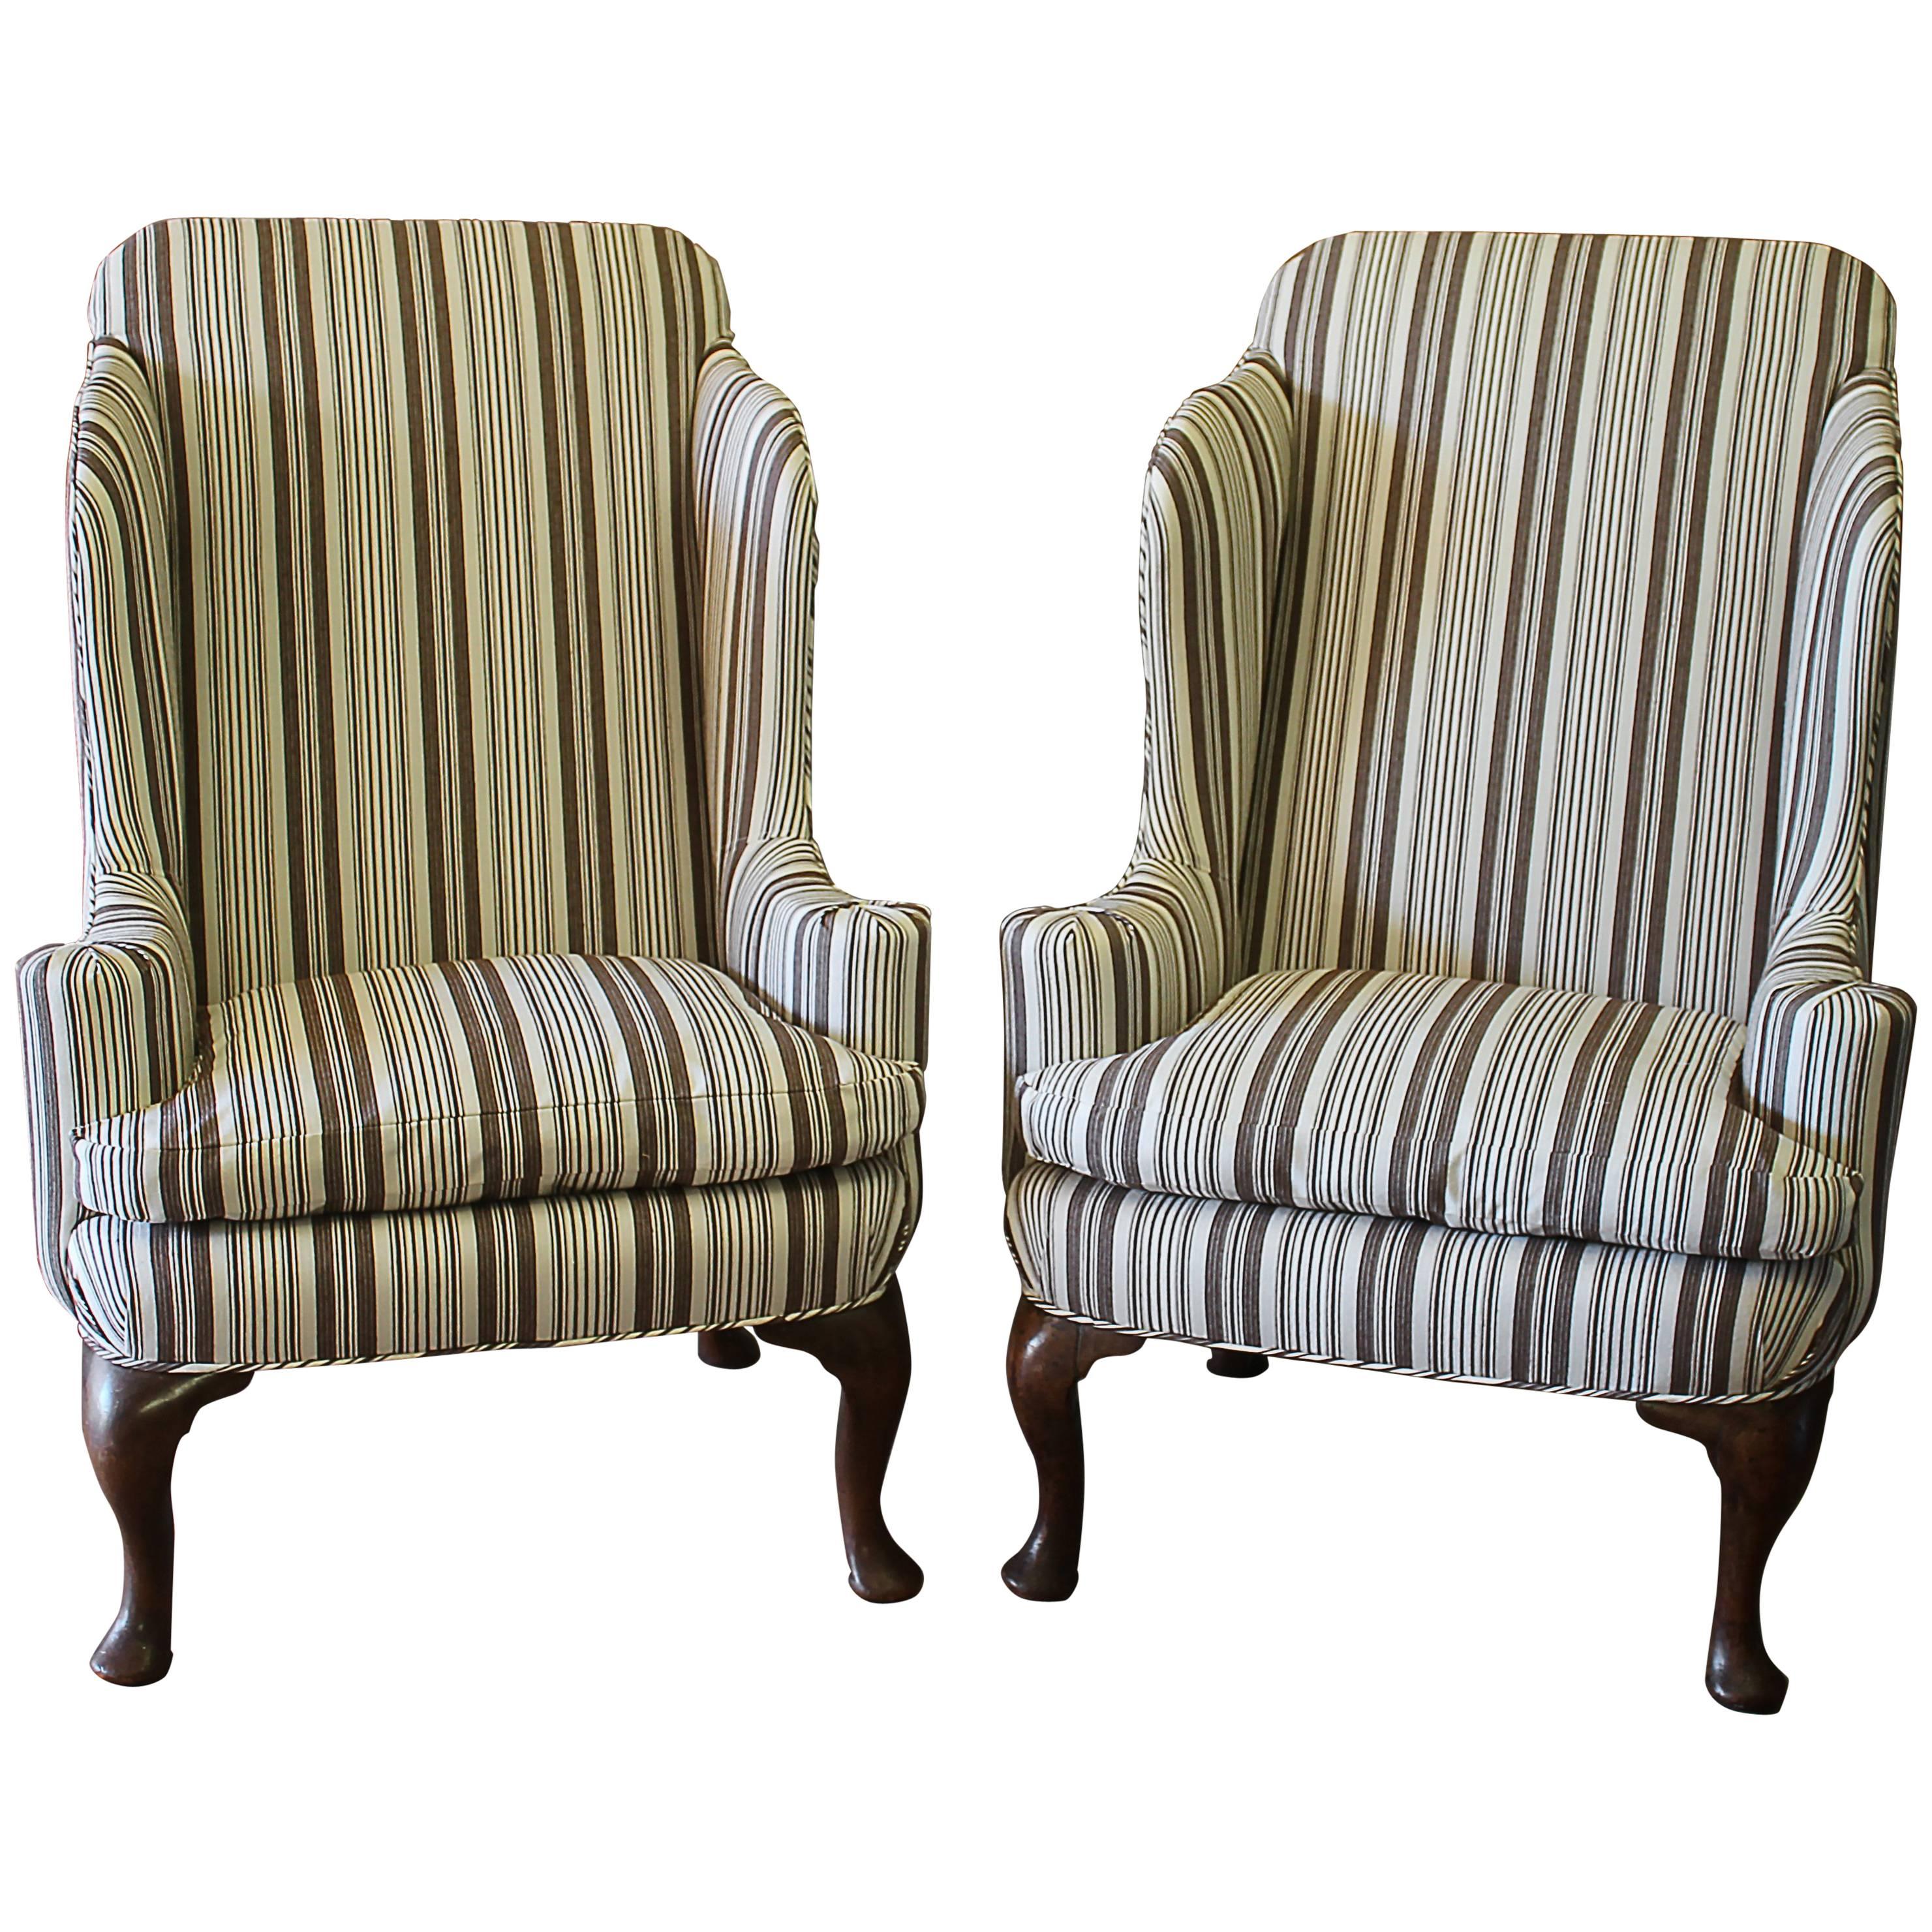 Midcentury Pair of Queen Anne Style Wing Chairs in Brown Ticking Stripe